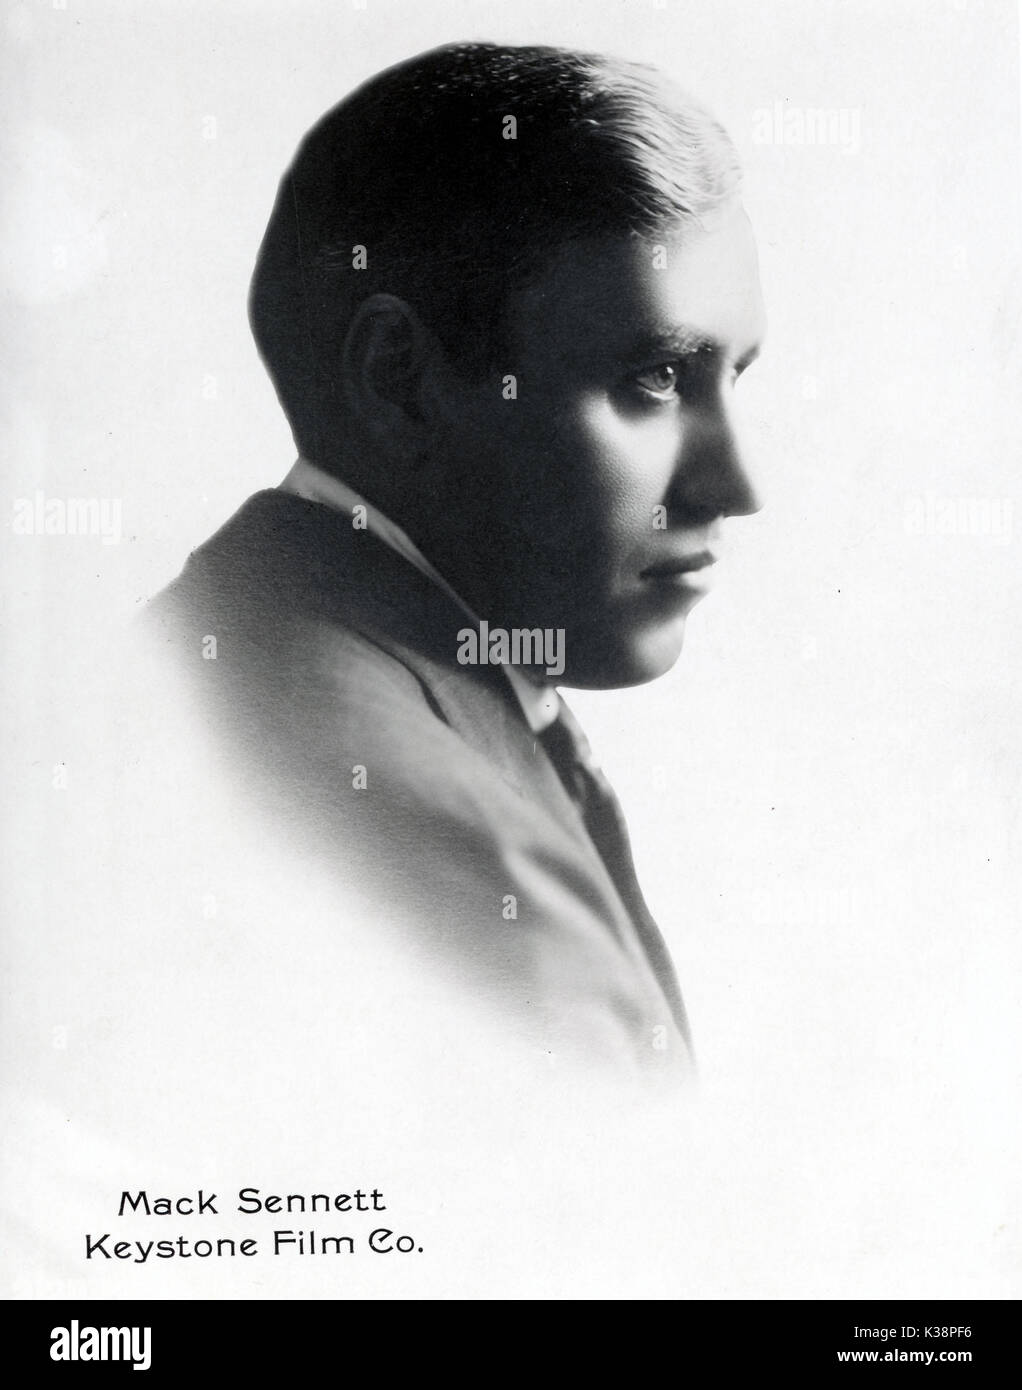 MACK SENNETT Film pioneer writer, actor, director, producer - mostly of comedy material Stock Photo